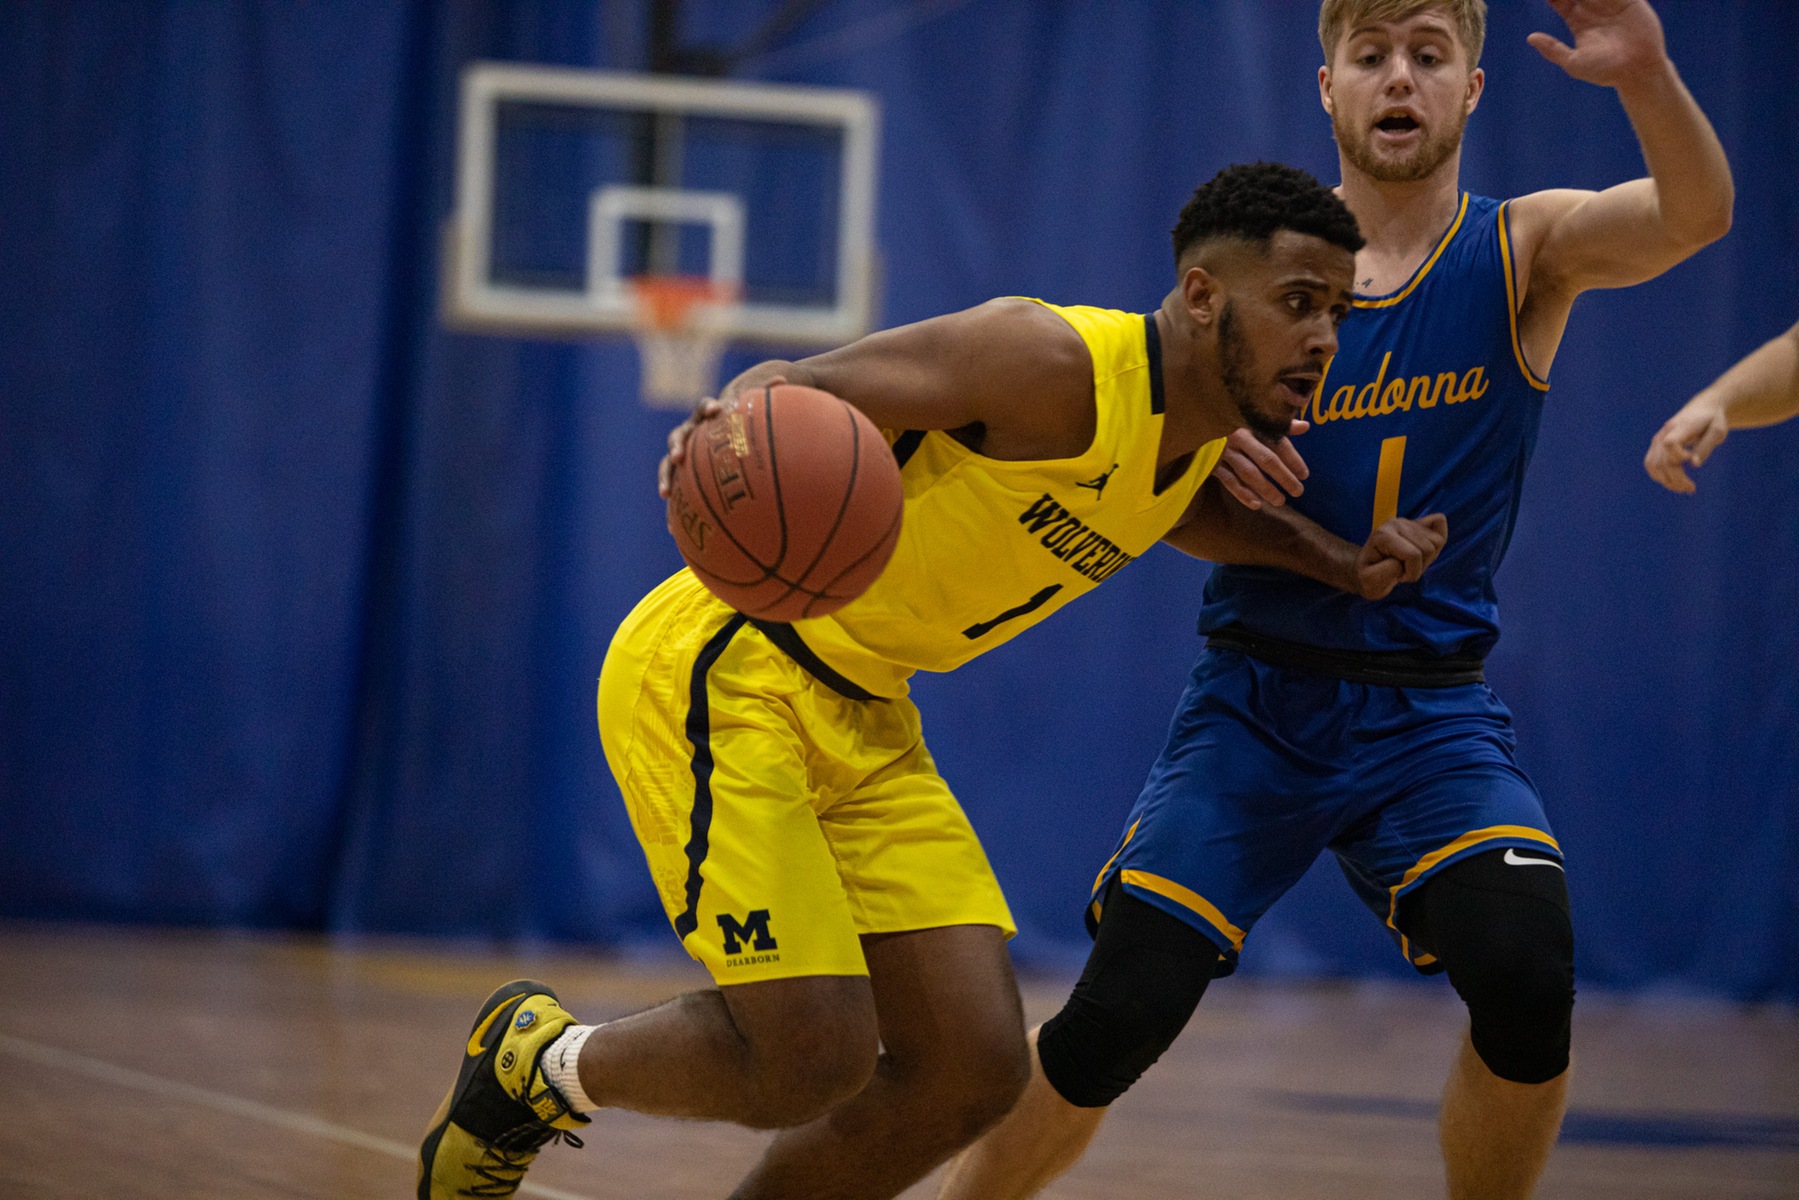 First half deficit too much to overcome for the Wolverines, fall to LTU